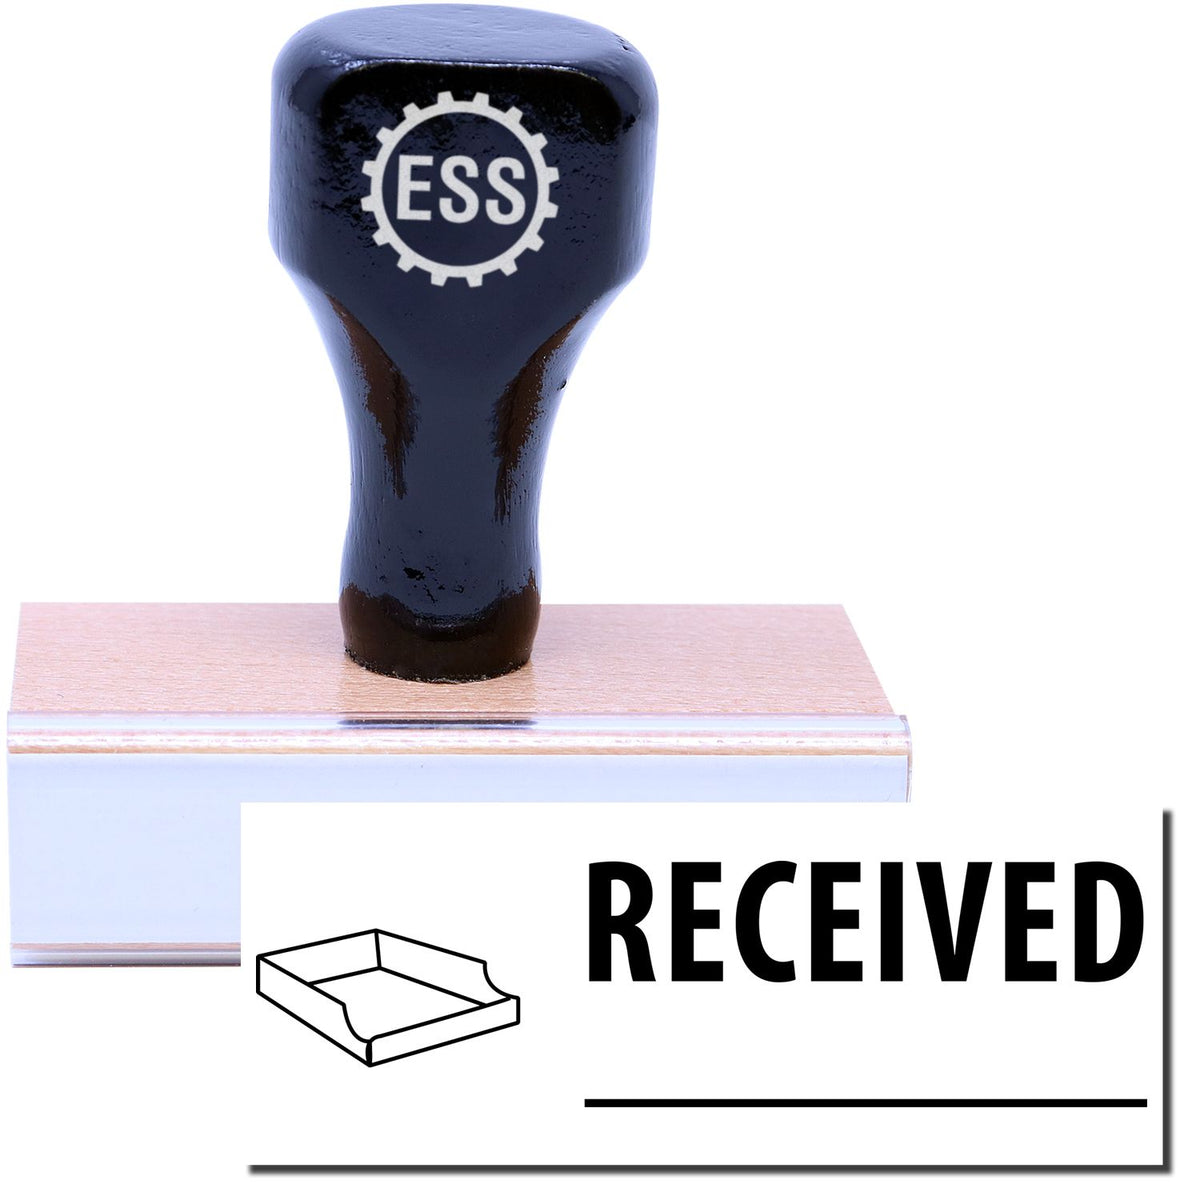 A stock office rubber stamp with a stamped image showing how the text &quot;RECEIVED&quot; with a line under the text and a box icon on the left side is displayed after stamping.